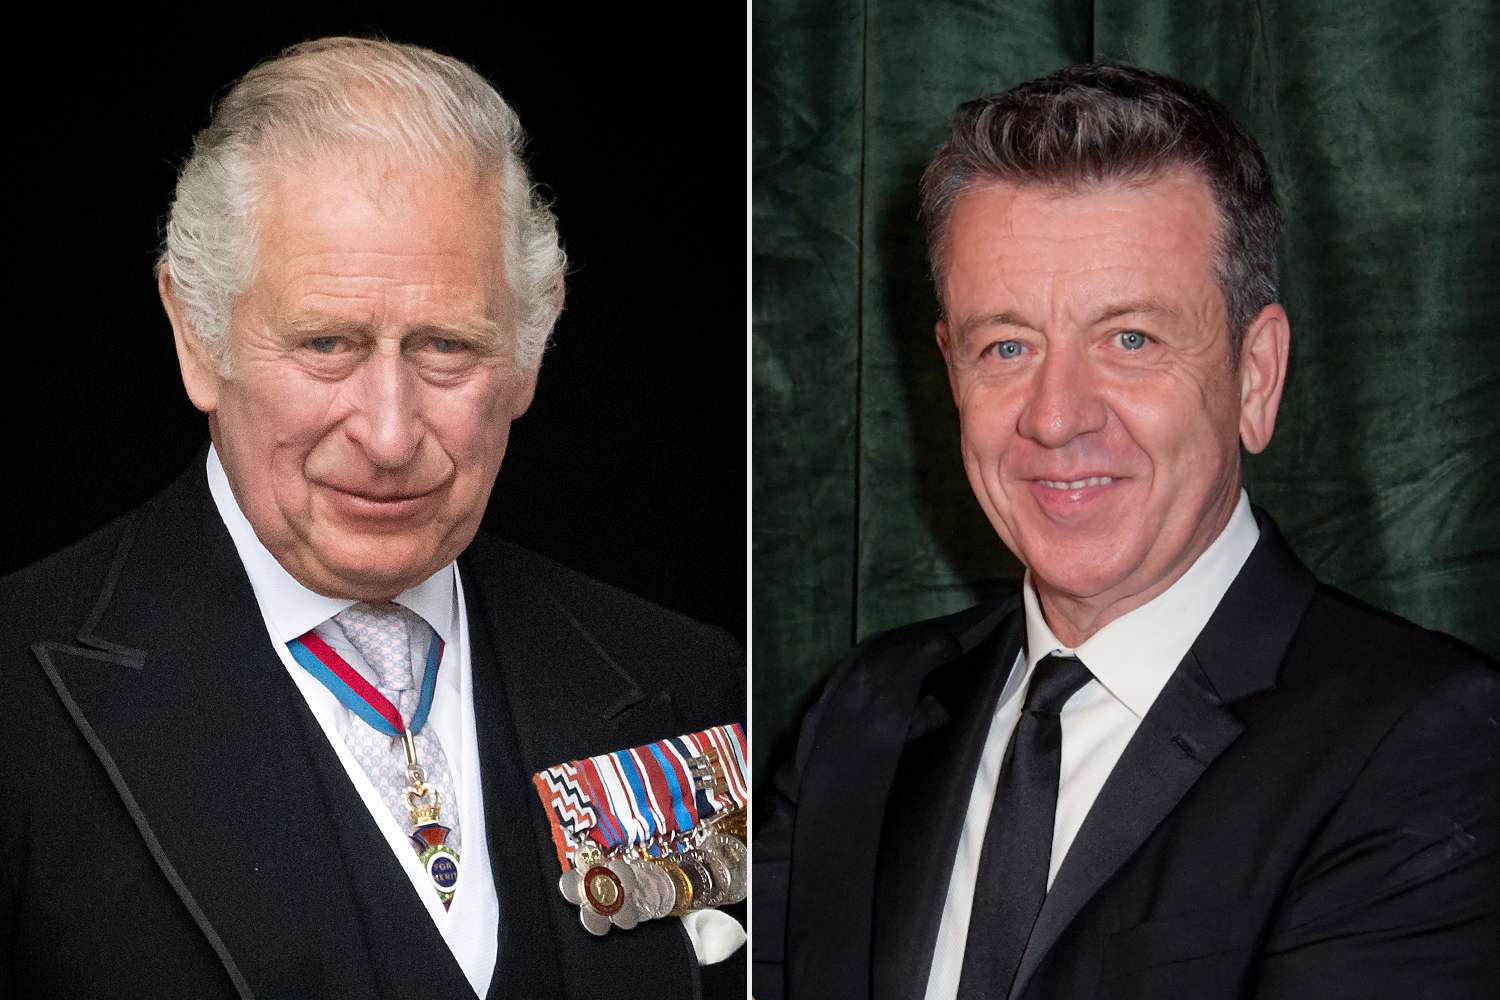 Prince Charles, Prince of Wales attends the National Service of Thanksgiving at St Paul's Cathedral; Peter Morgan accepts the award for outstanding Writing For A Drama Series for The Crown